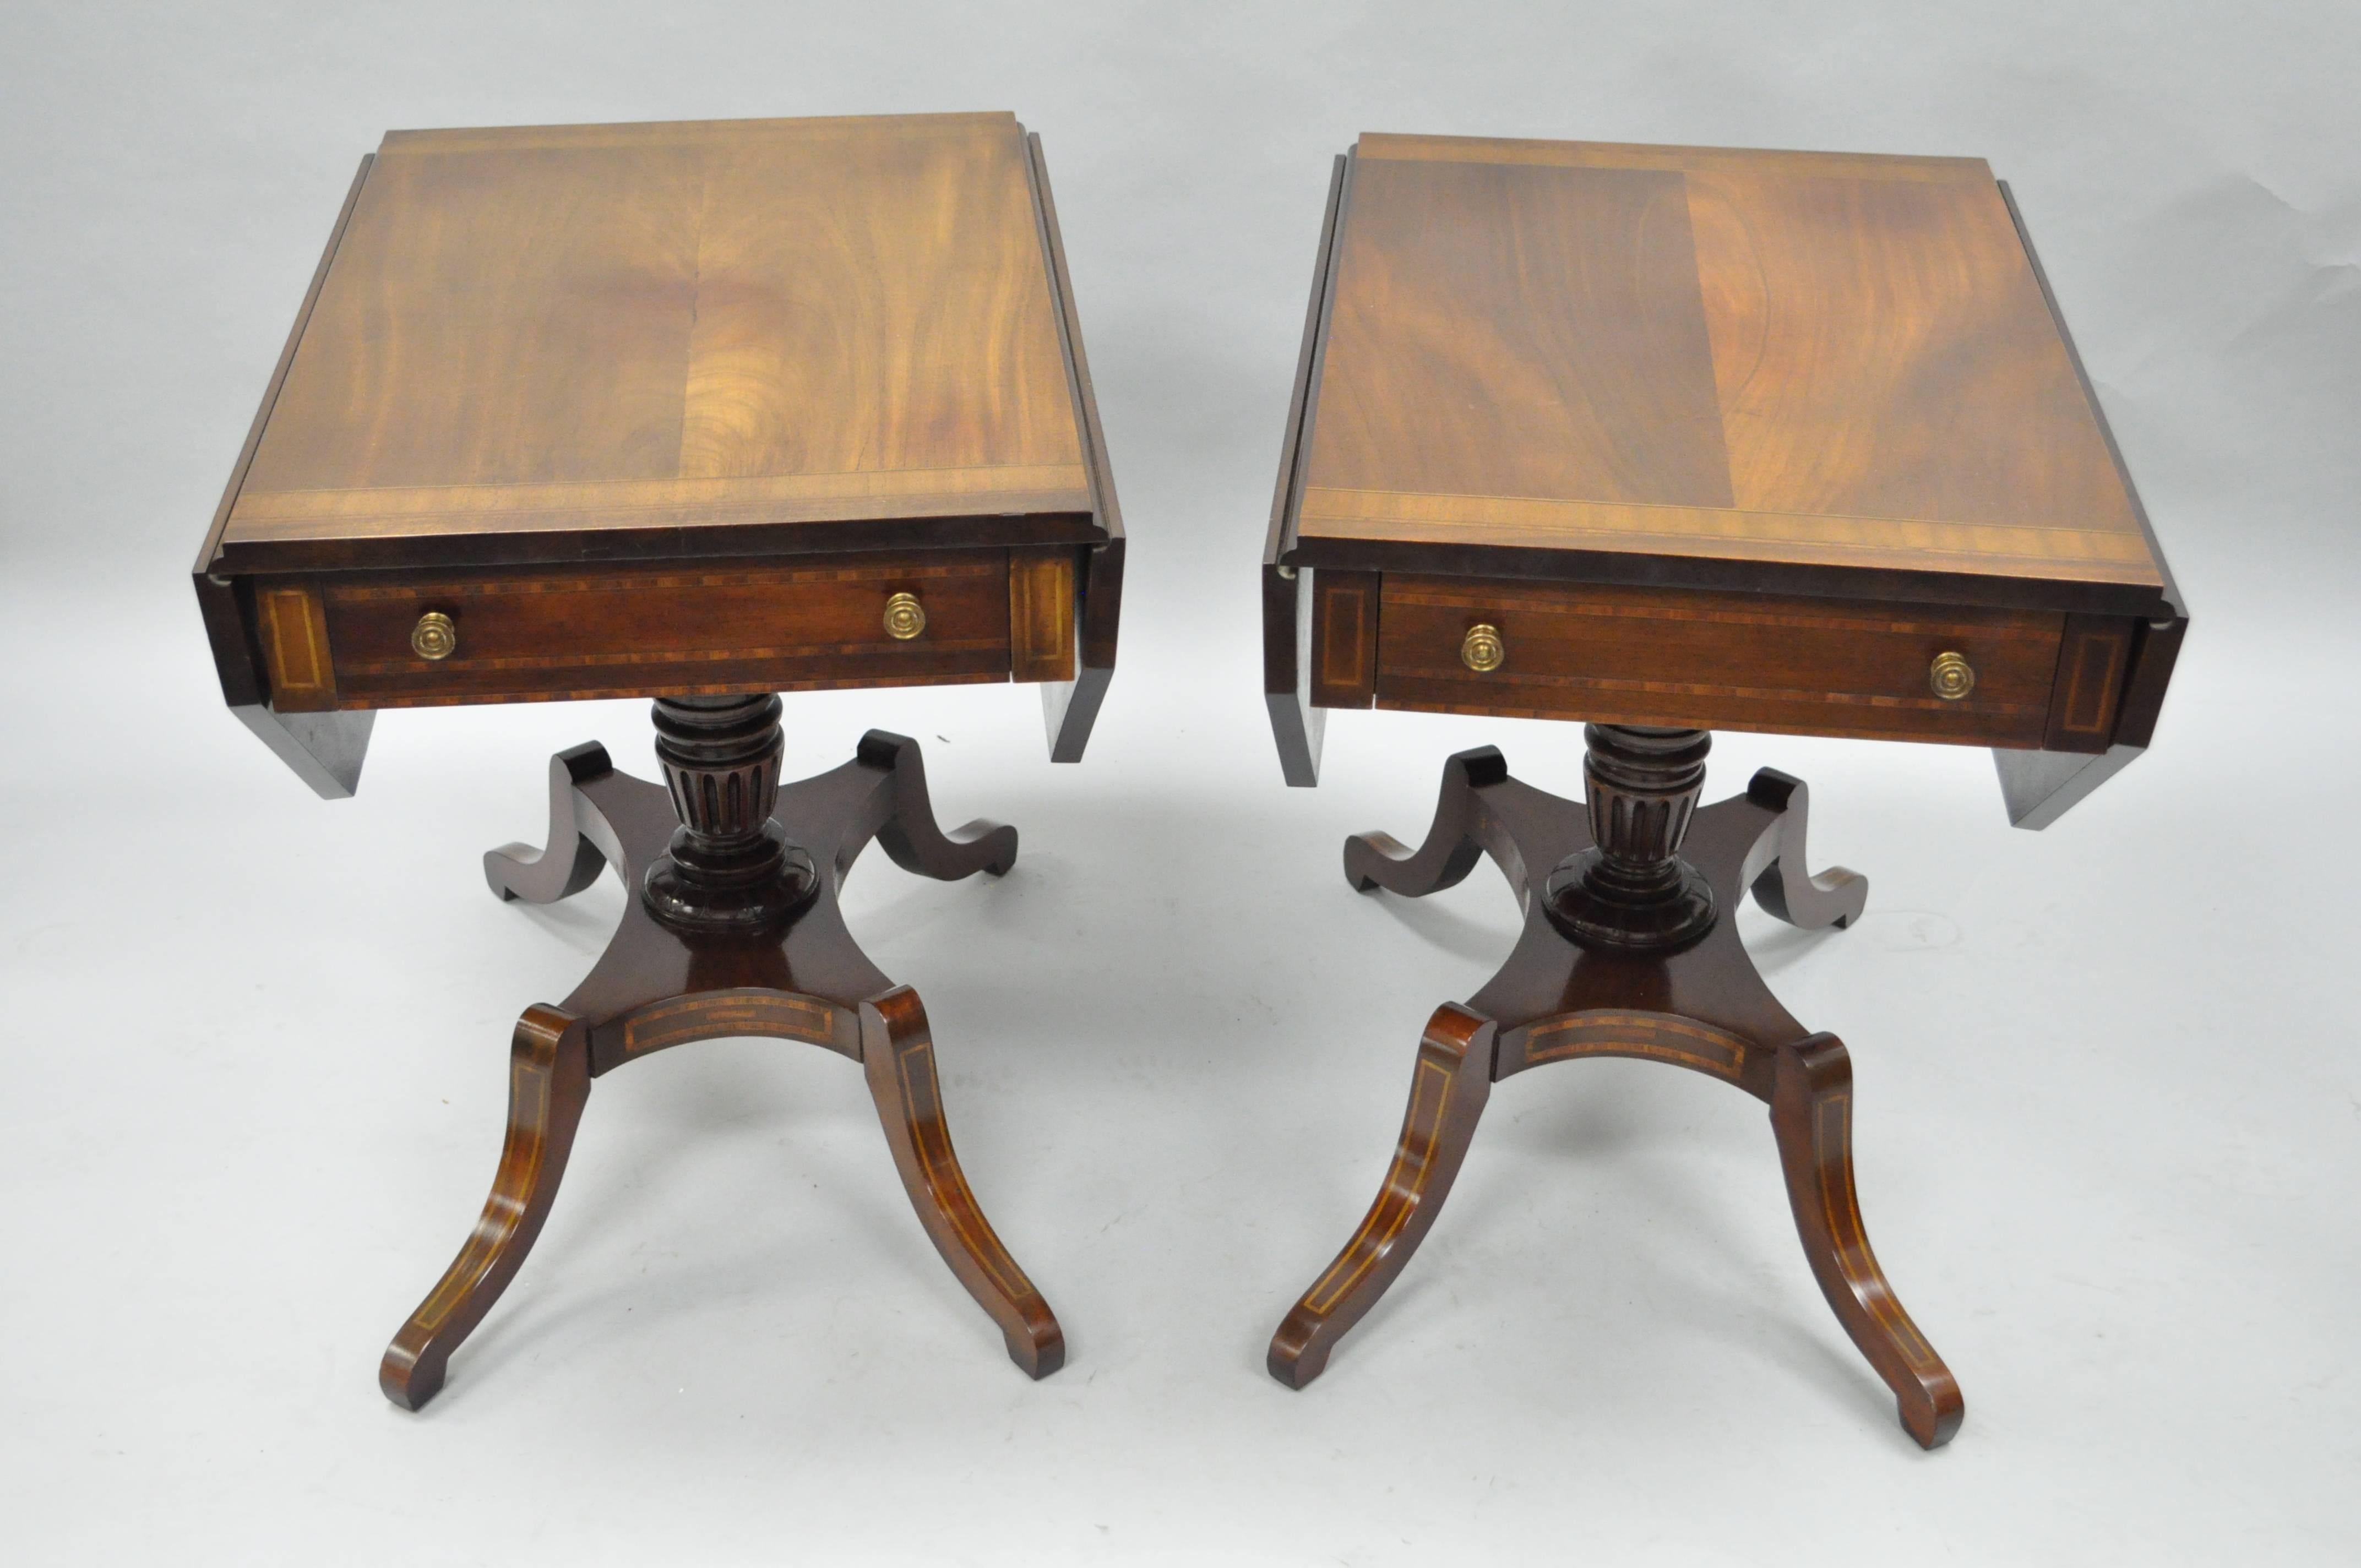 Pair of antique Regency style mahogany drop leaf Pembroke tables with faux drawer finished backs. Item features; mahogany wood construction, satinwood banded inlay throughout, banded top, single dovetailed drawer, finished back with faux drawers on